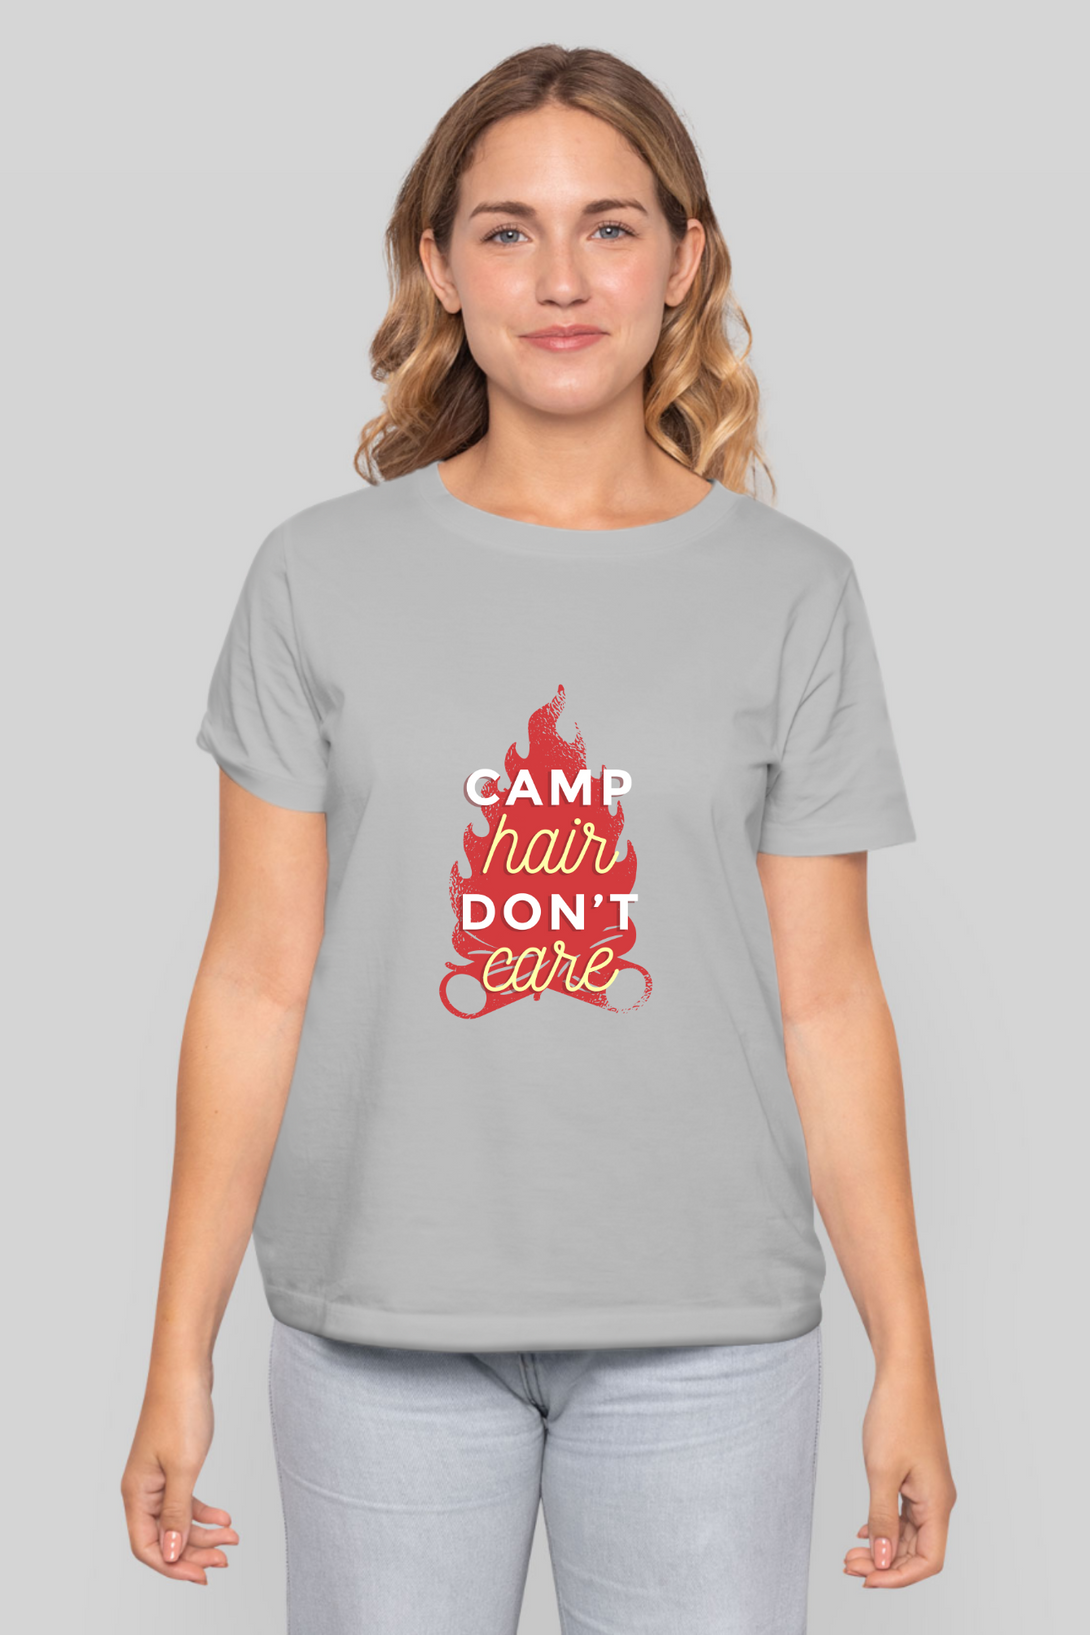 Camping Vibes Printed T-Shirt For Women - WowWaves - 11